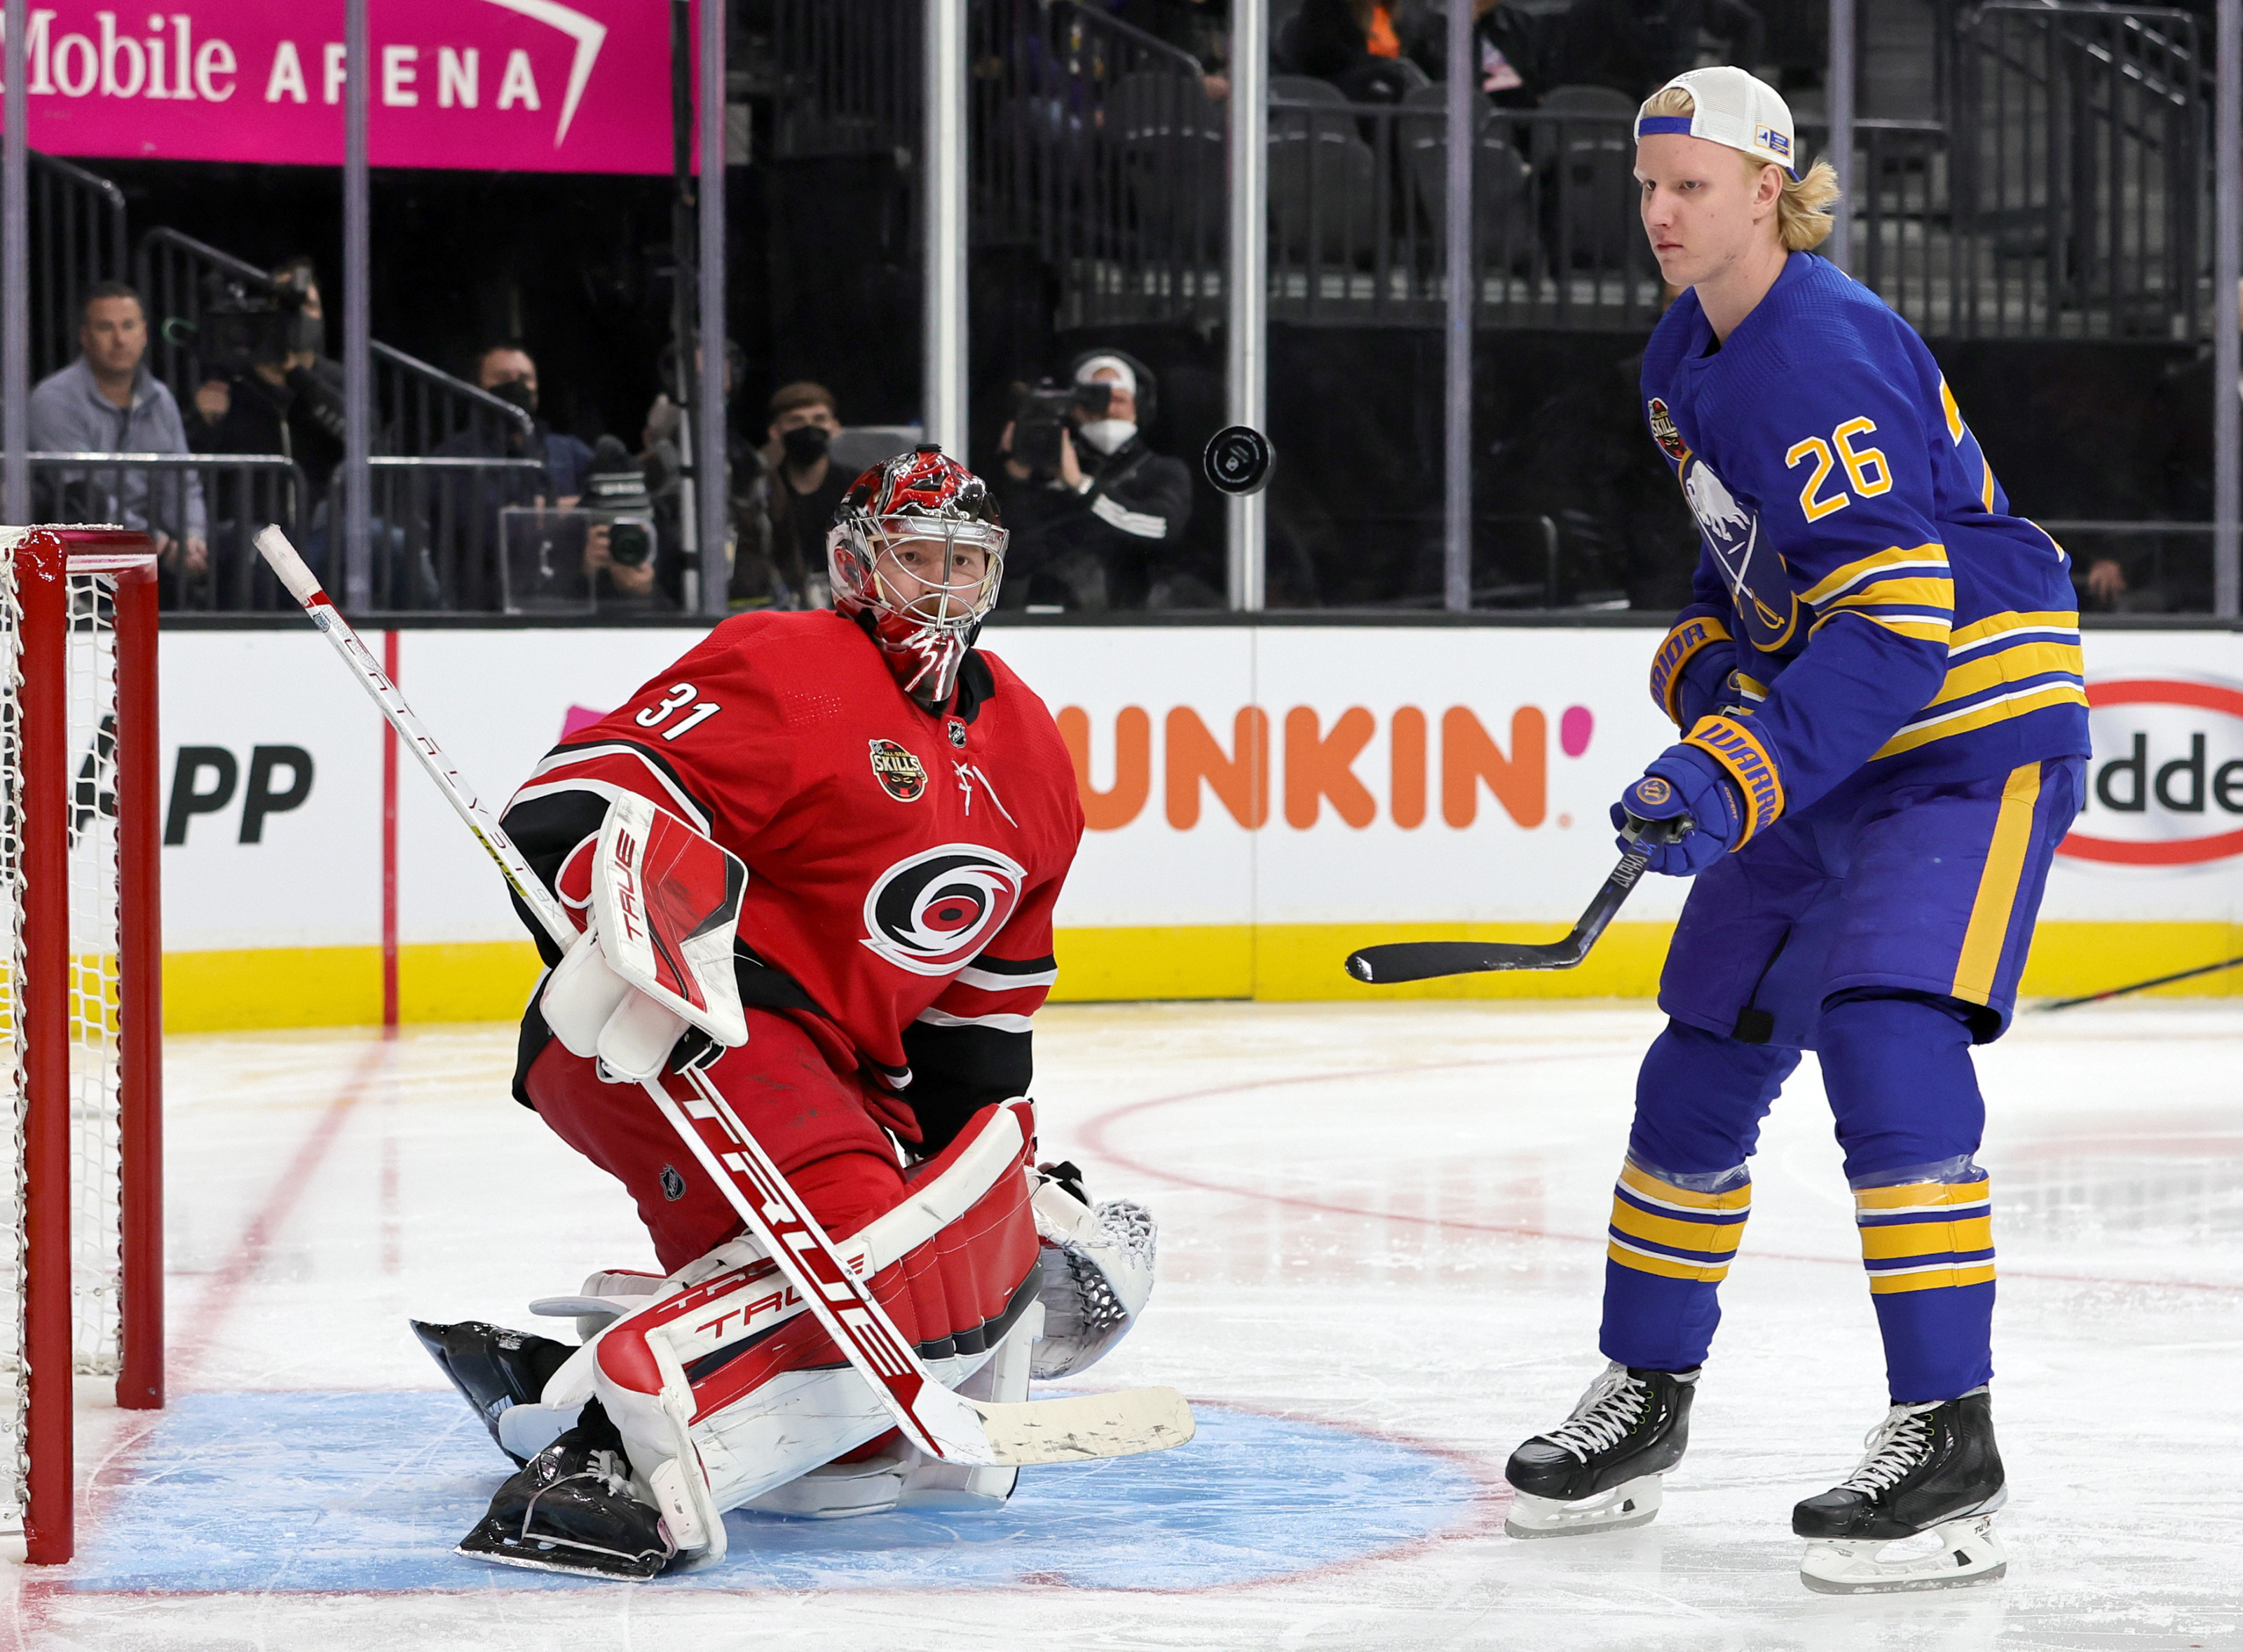 Rasmus Dahlin will get his All-Star moment after all